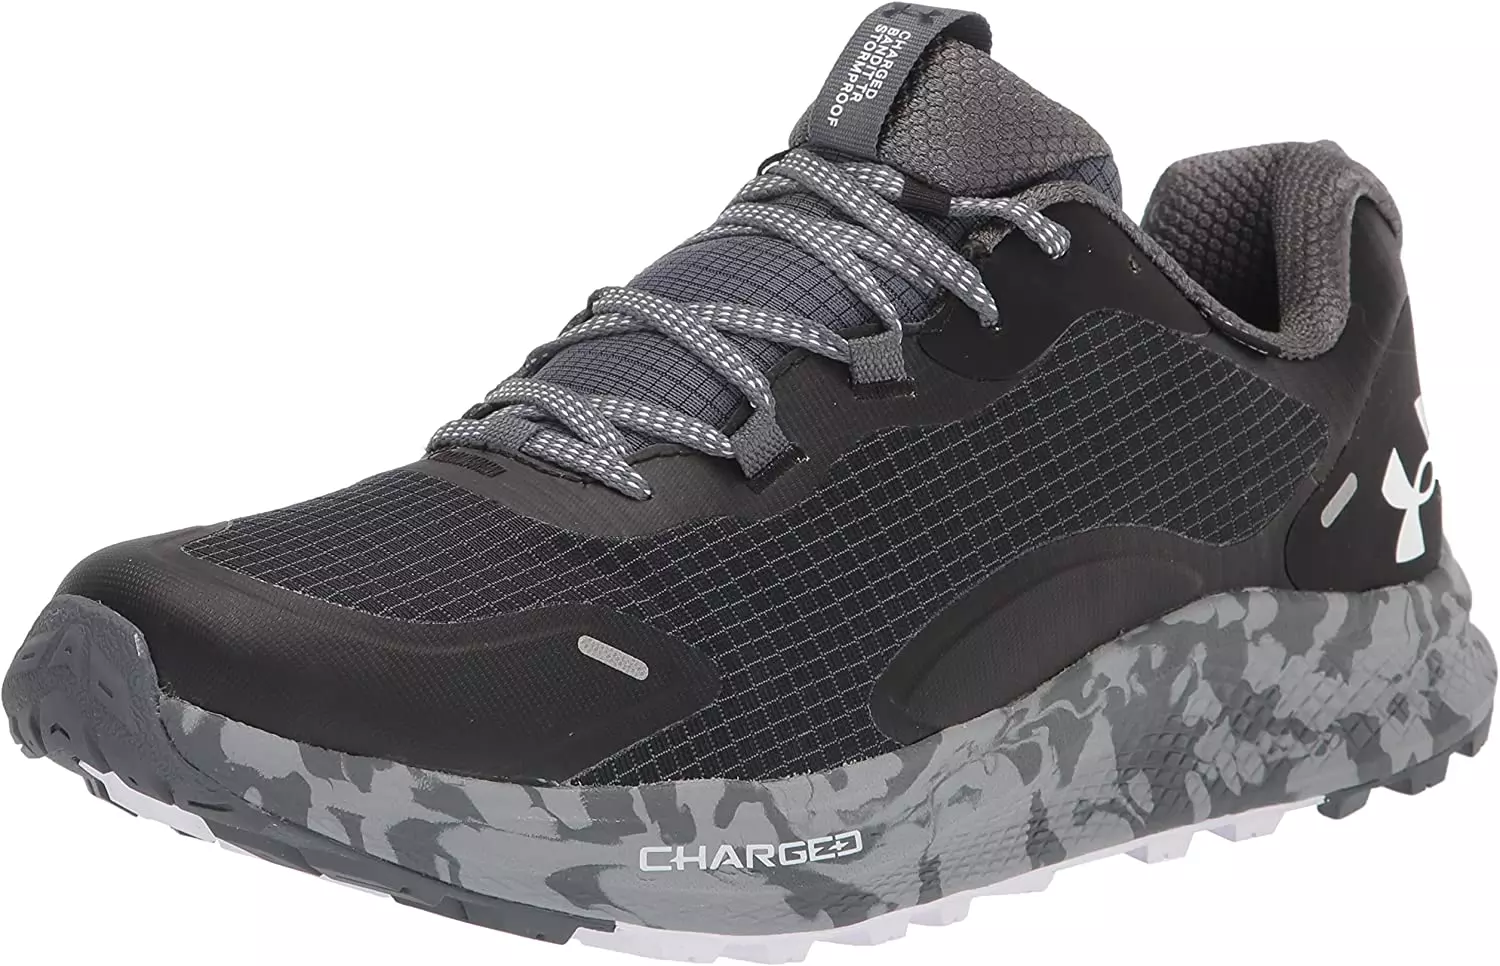 The Under Armour Men's Charged Bandit 2 Sp Road Running Shoe is a great shoe for so many different conditions including on the golf course with it's simple and clean mesh style